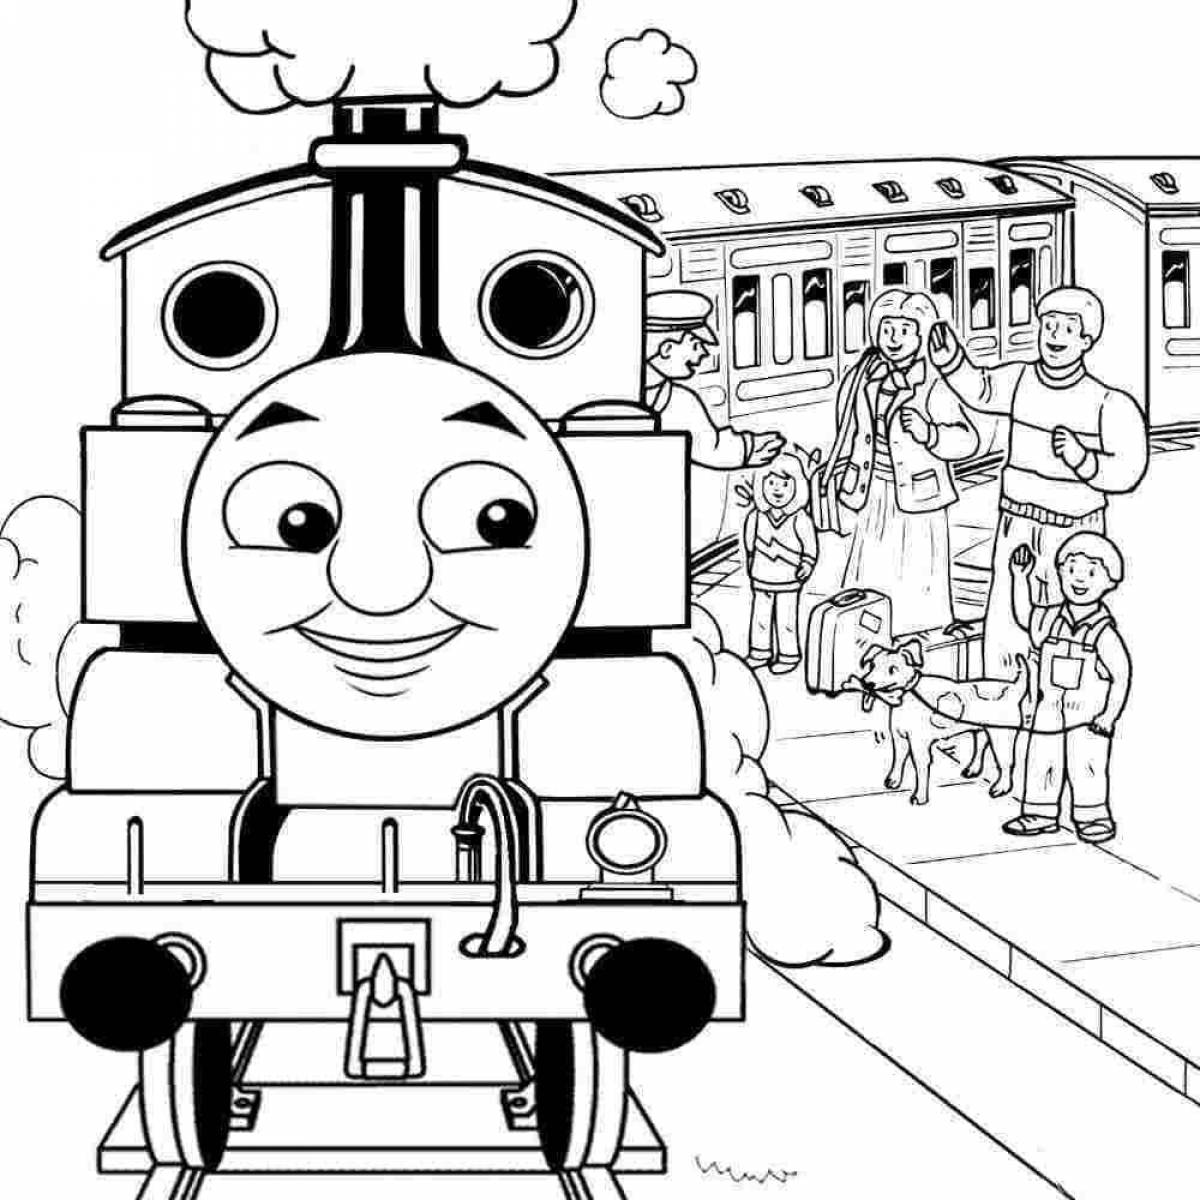 Thomas and friends #9